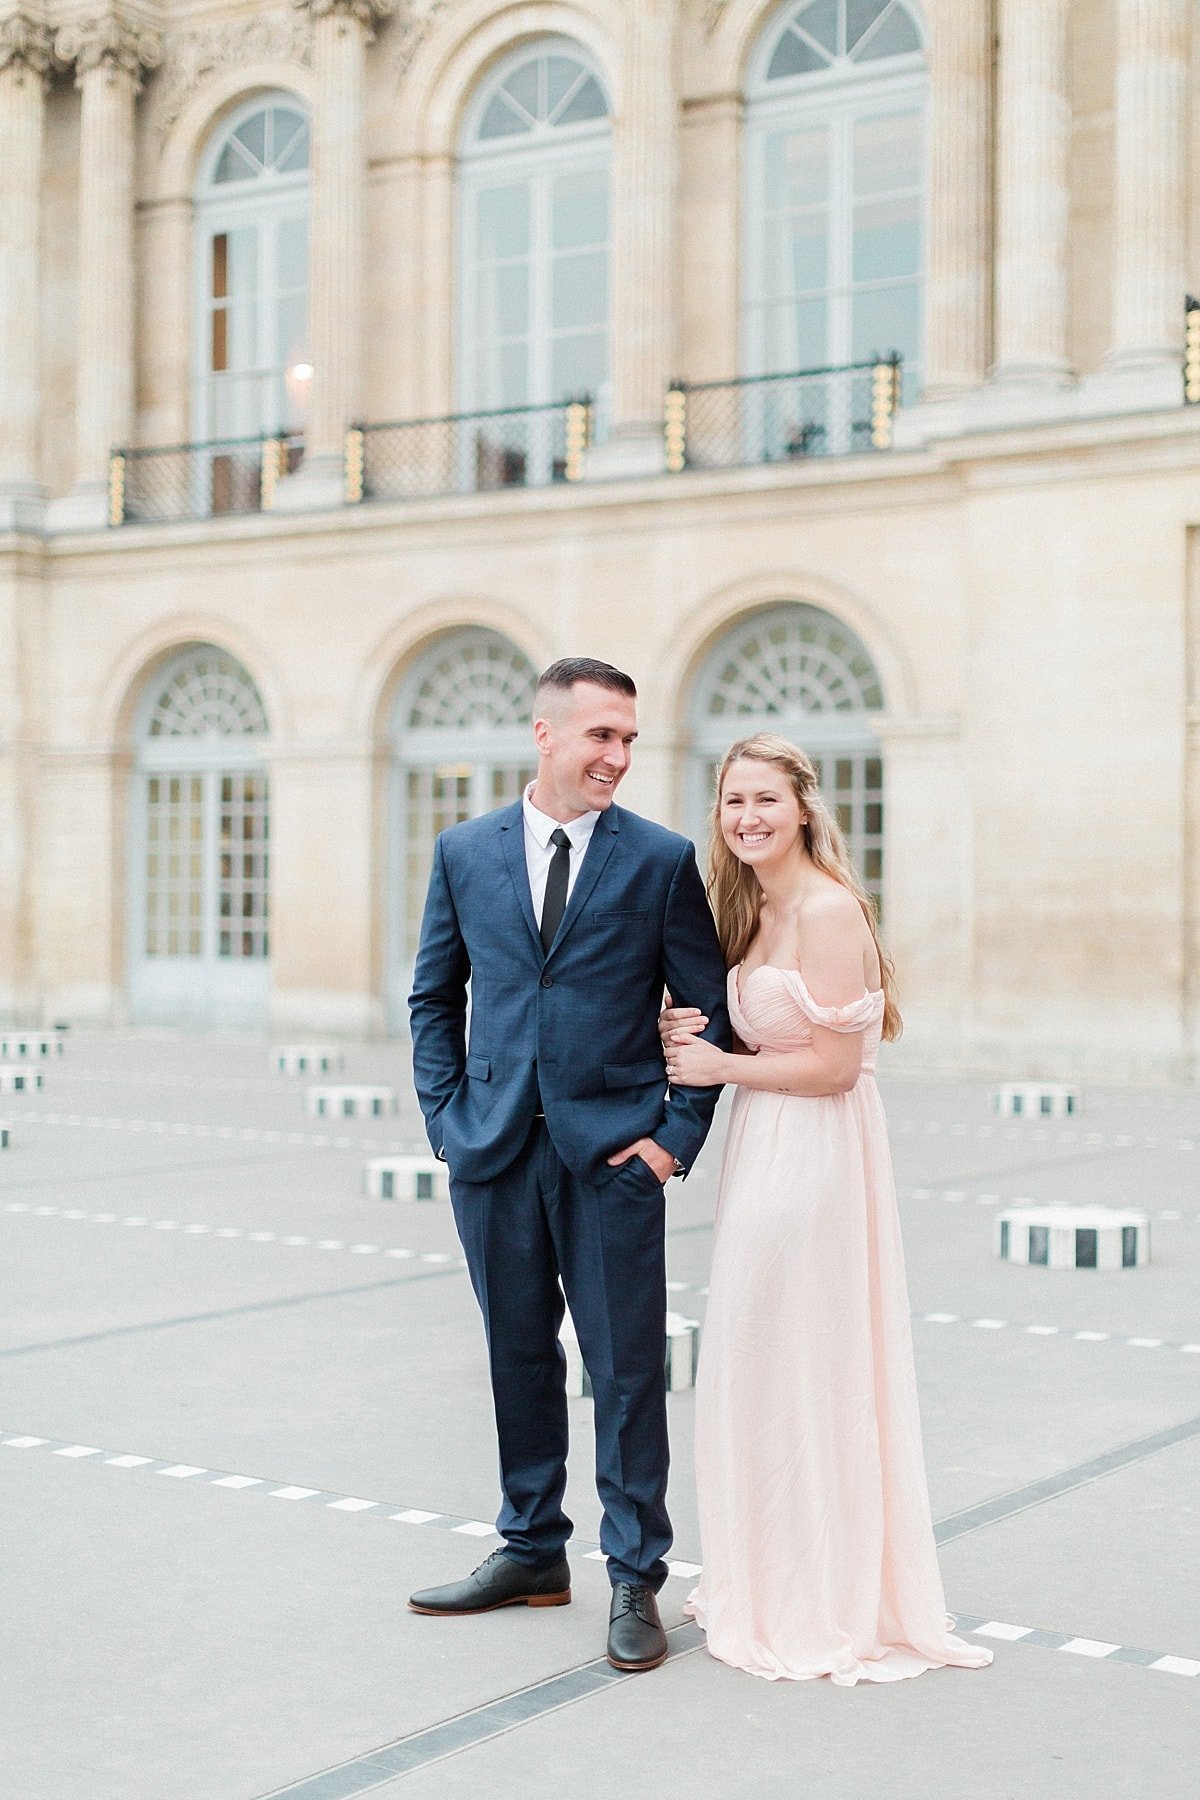 Paris, France anniversary session photographed at Palais Royal by France Destination Wedding Photographer, Alicia Yarrish Photography